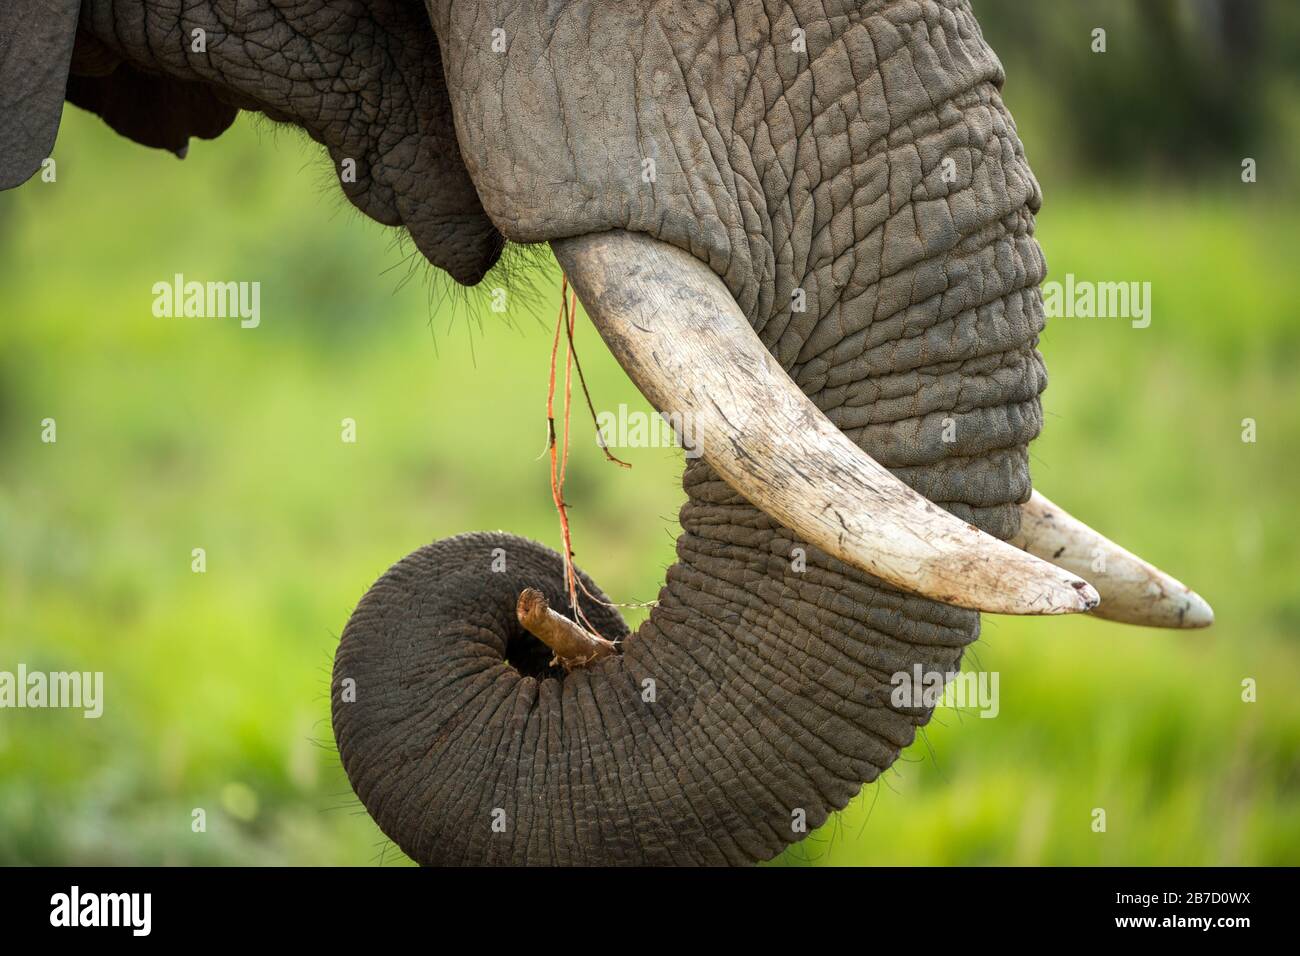 A detail close up of an eating elephant's face, trunk and mouth, taken at sunset in the Welgevonden Game reserve in South Africa. Stock Photo